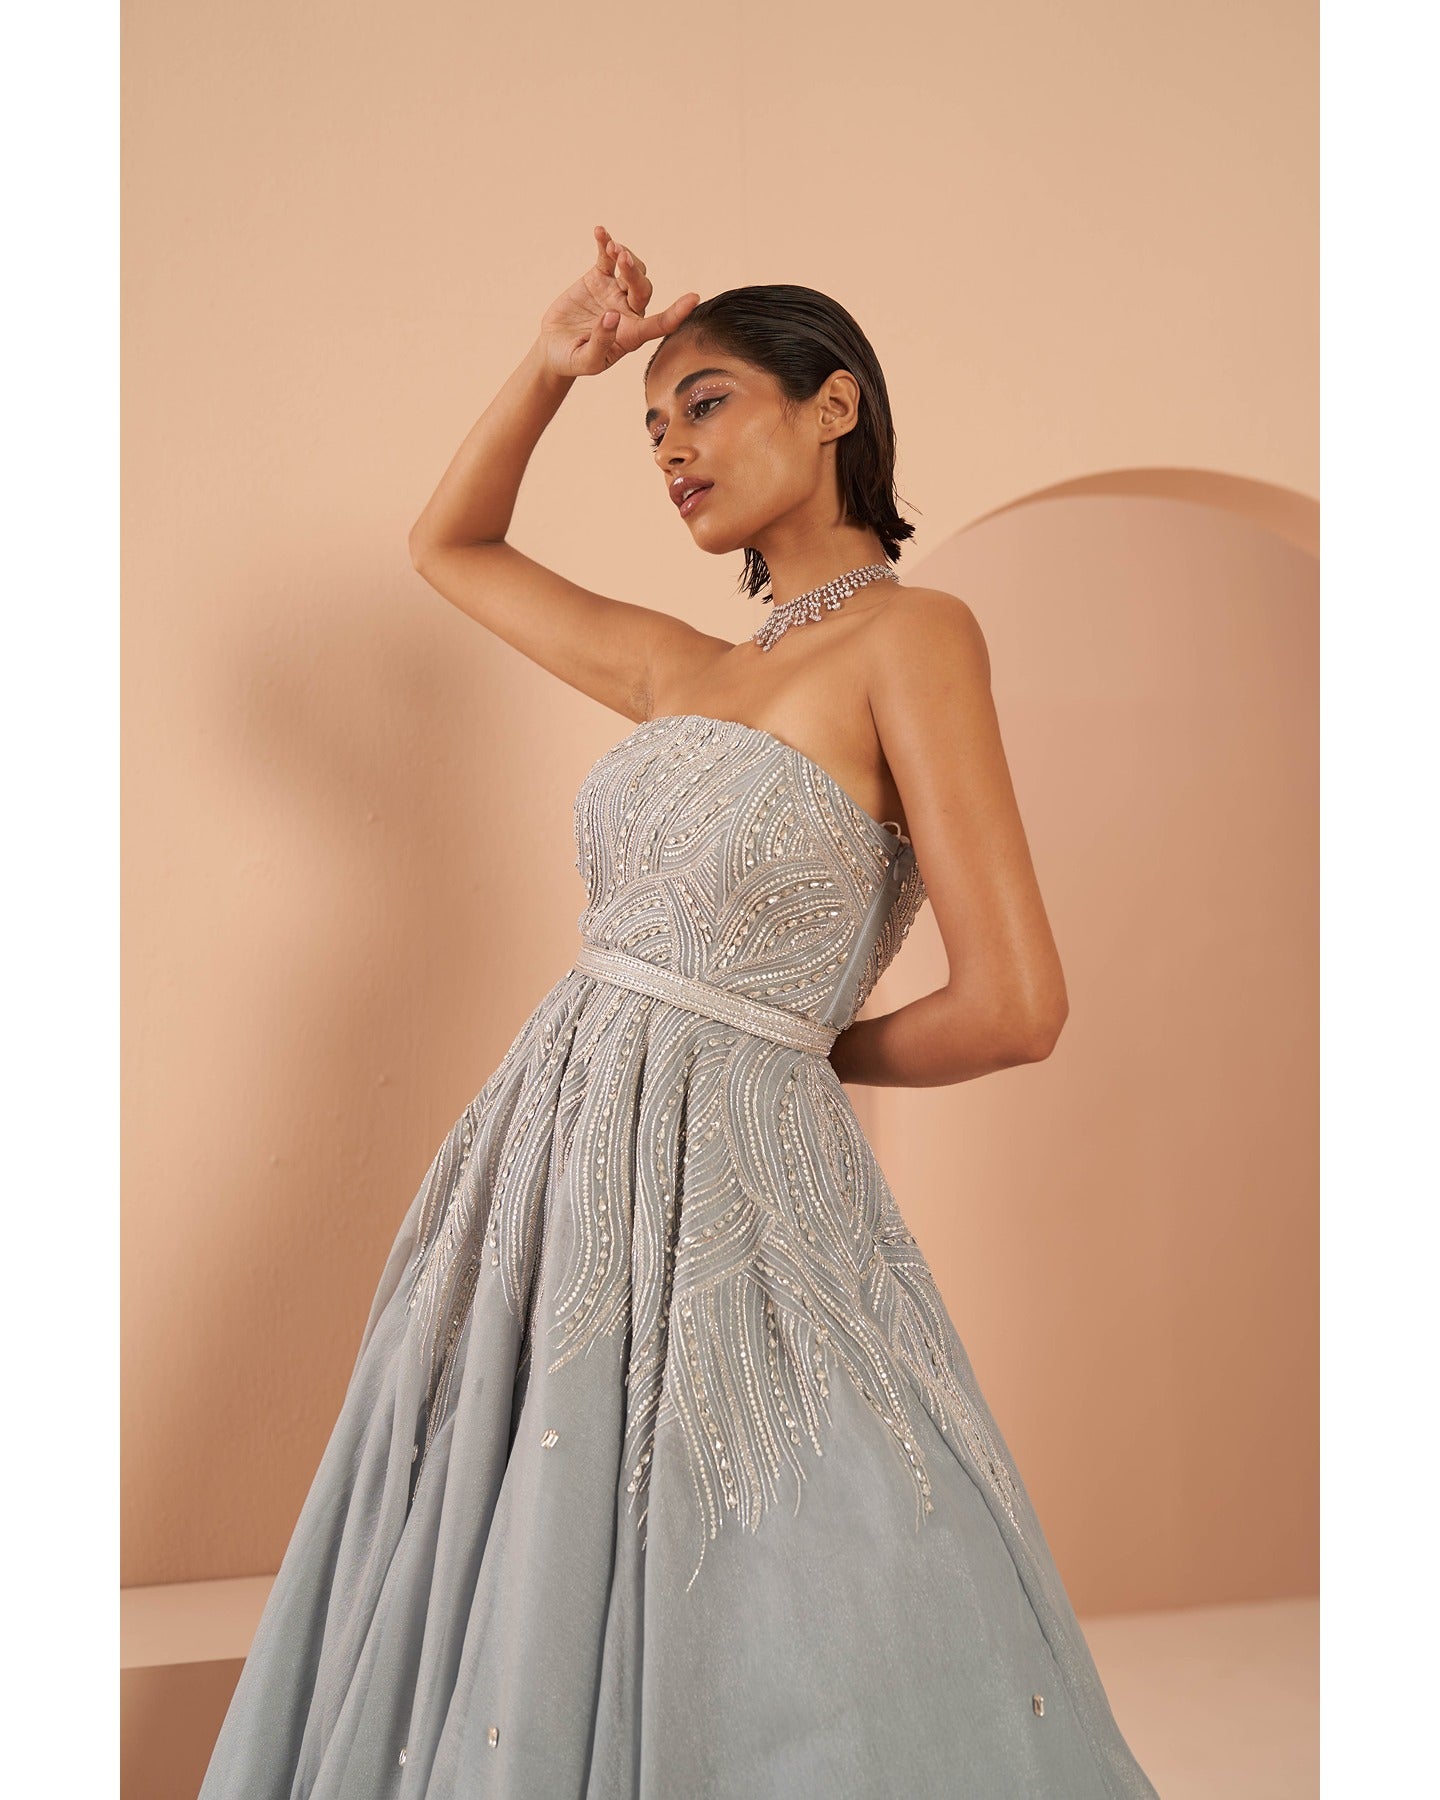 Ice Queen Elegance: Hand-embroidered perfection graces this strapless ice blue gown, a captivating blend of sophistication and charm.